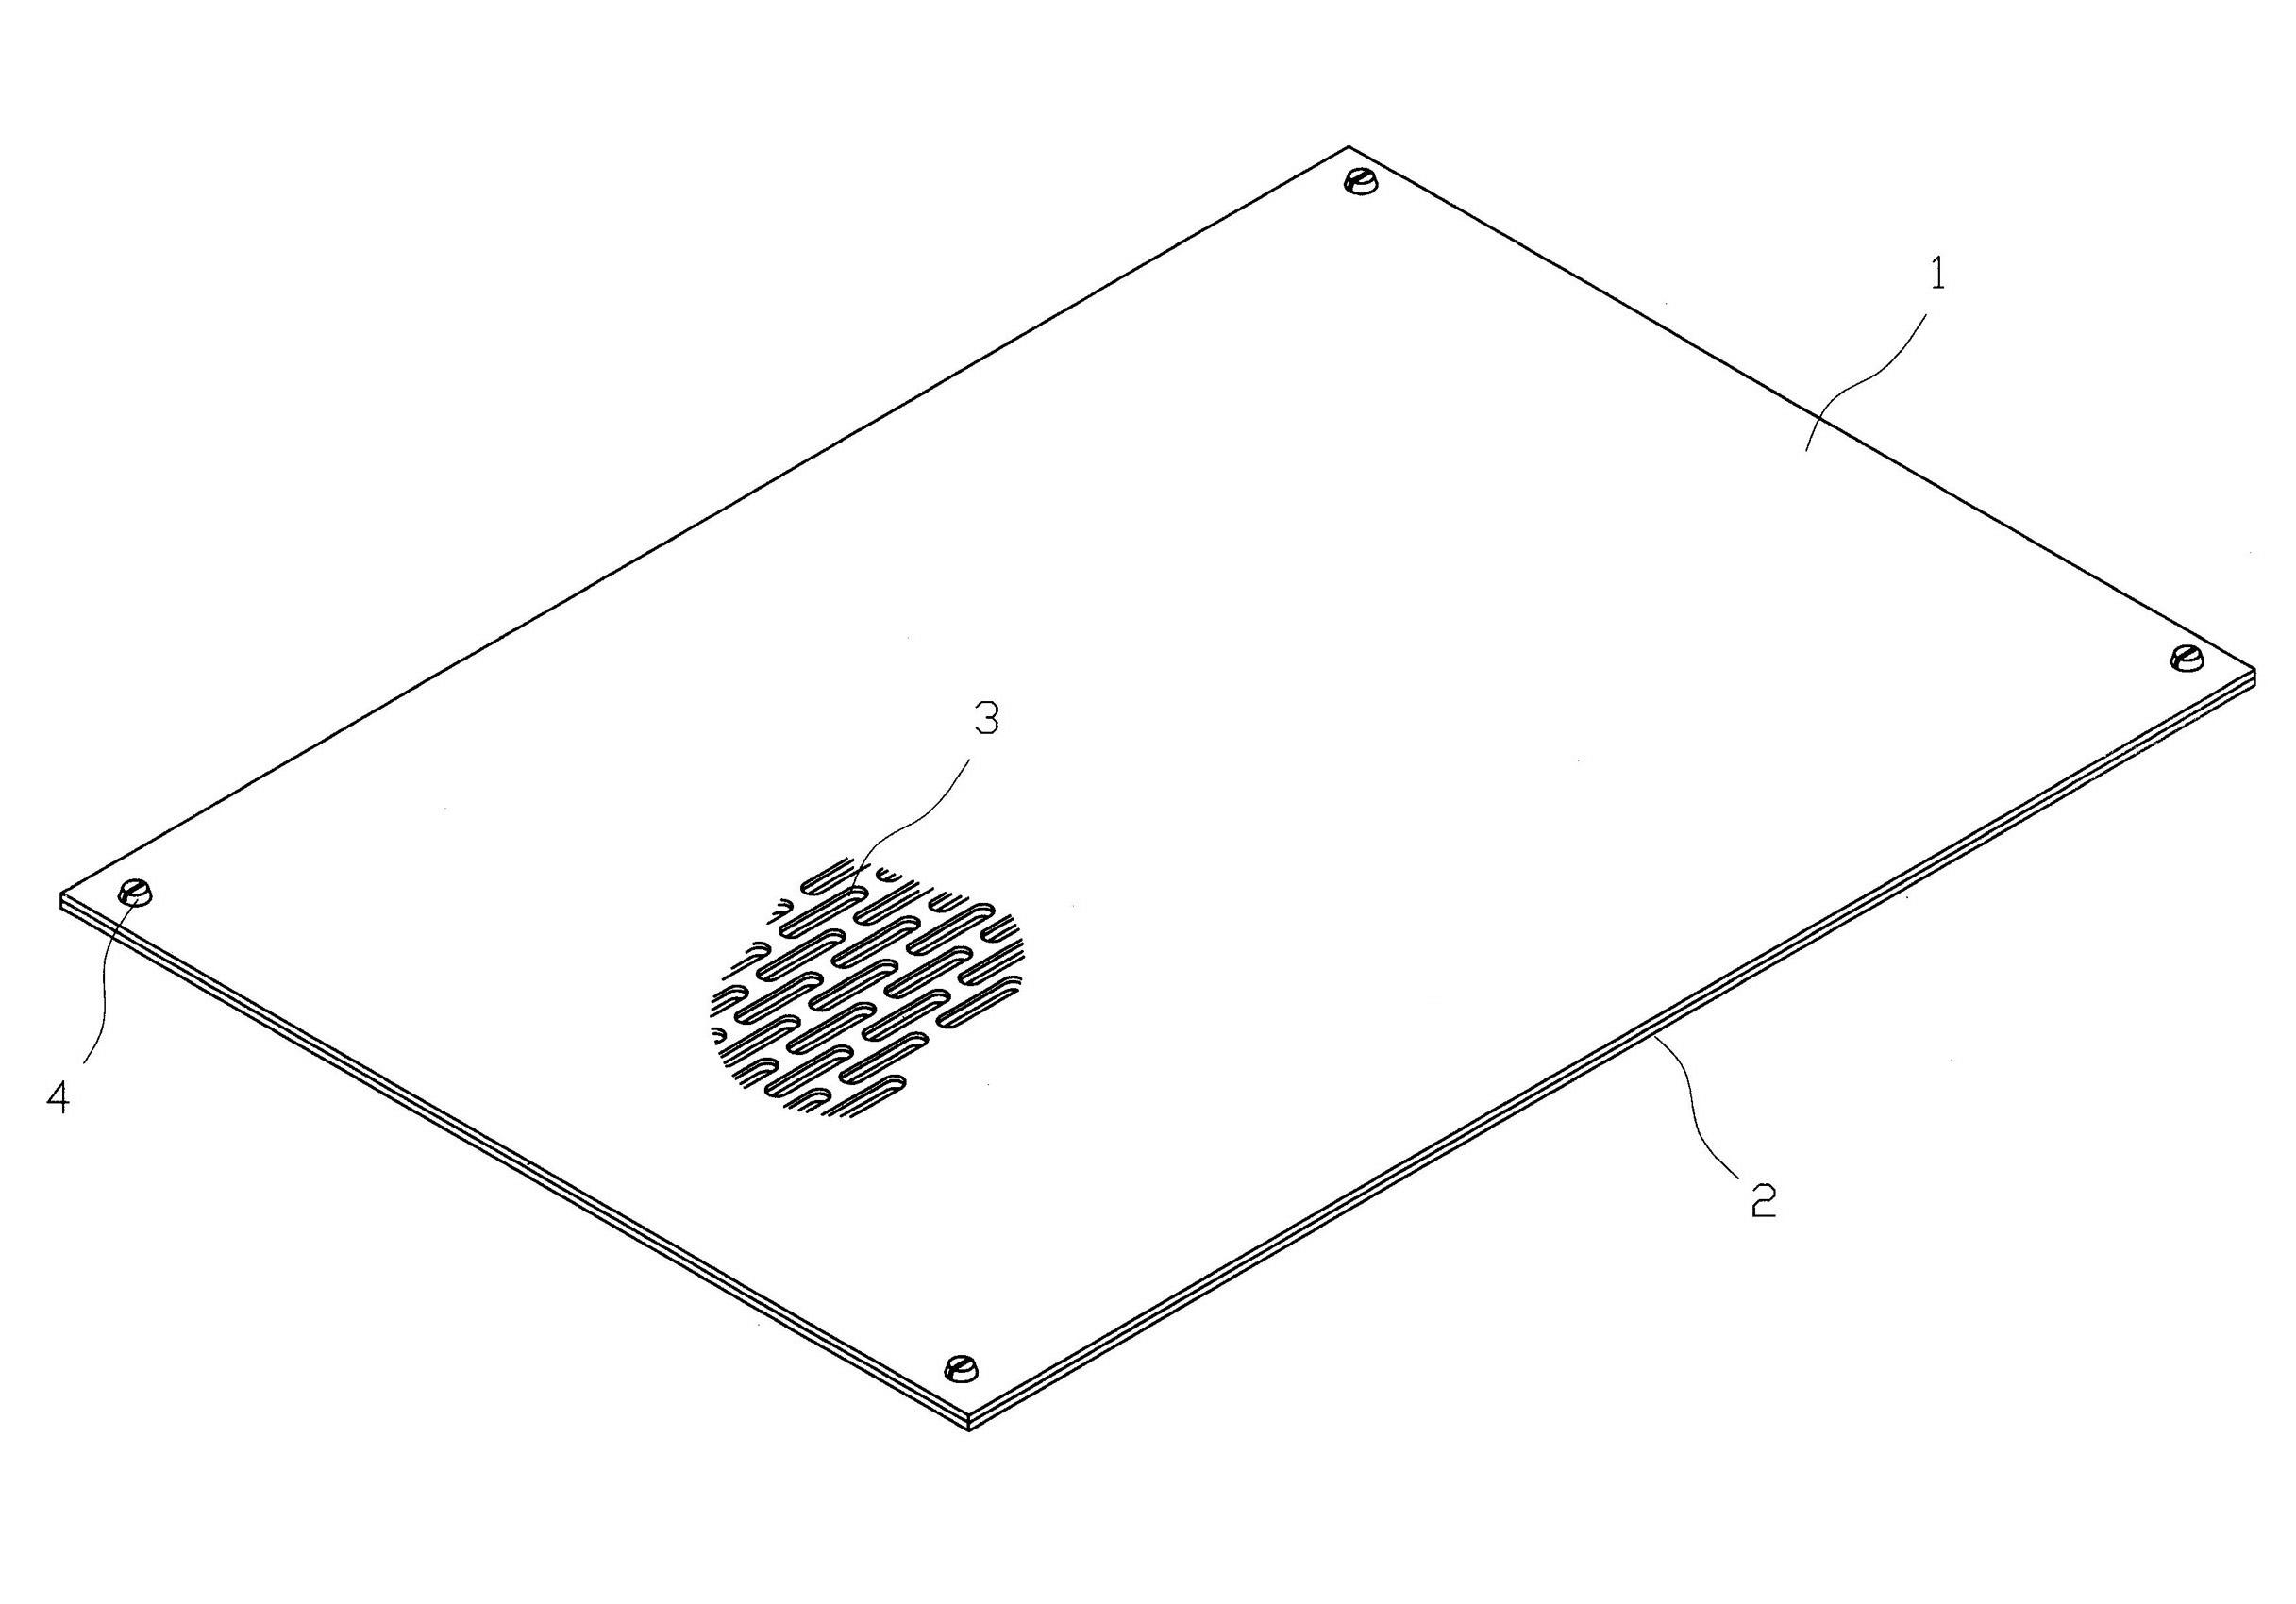 Novel screen plate with composite structure